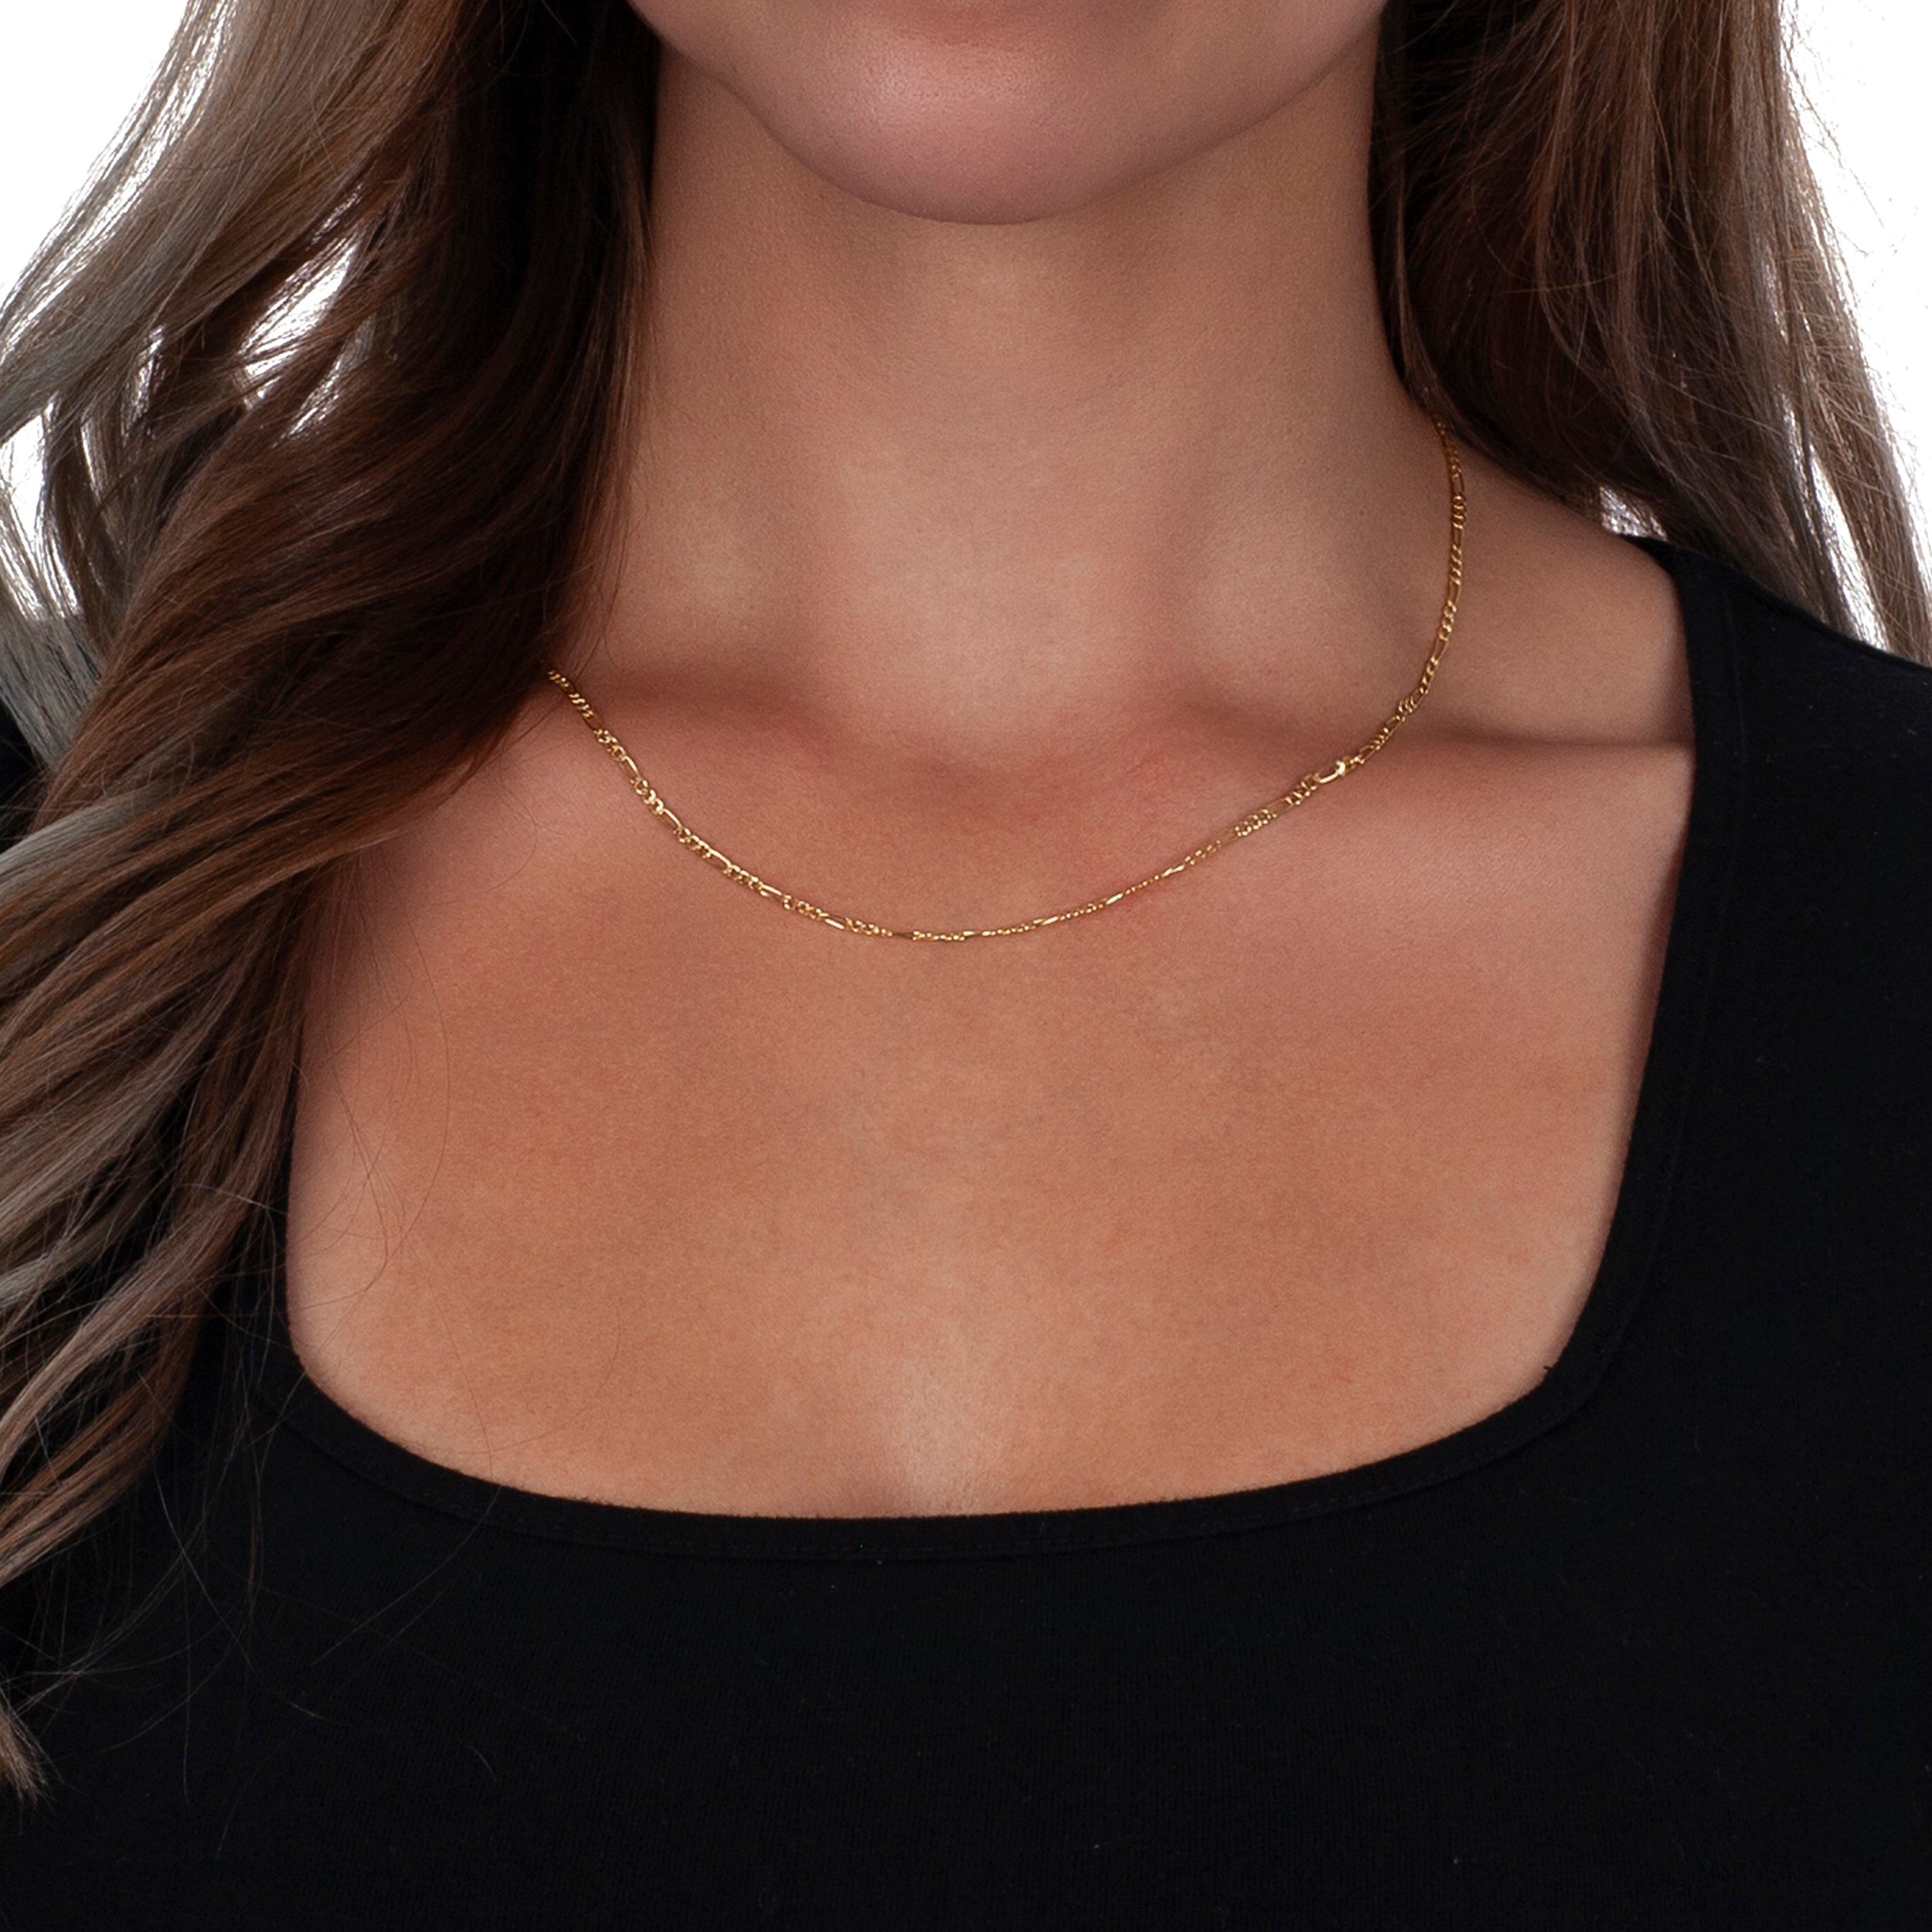 Hollow Figaro Chain Necklace 14K Yellow Gold 18